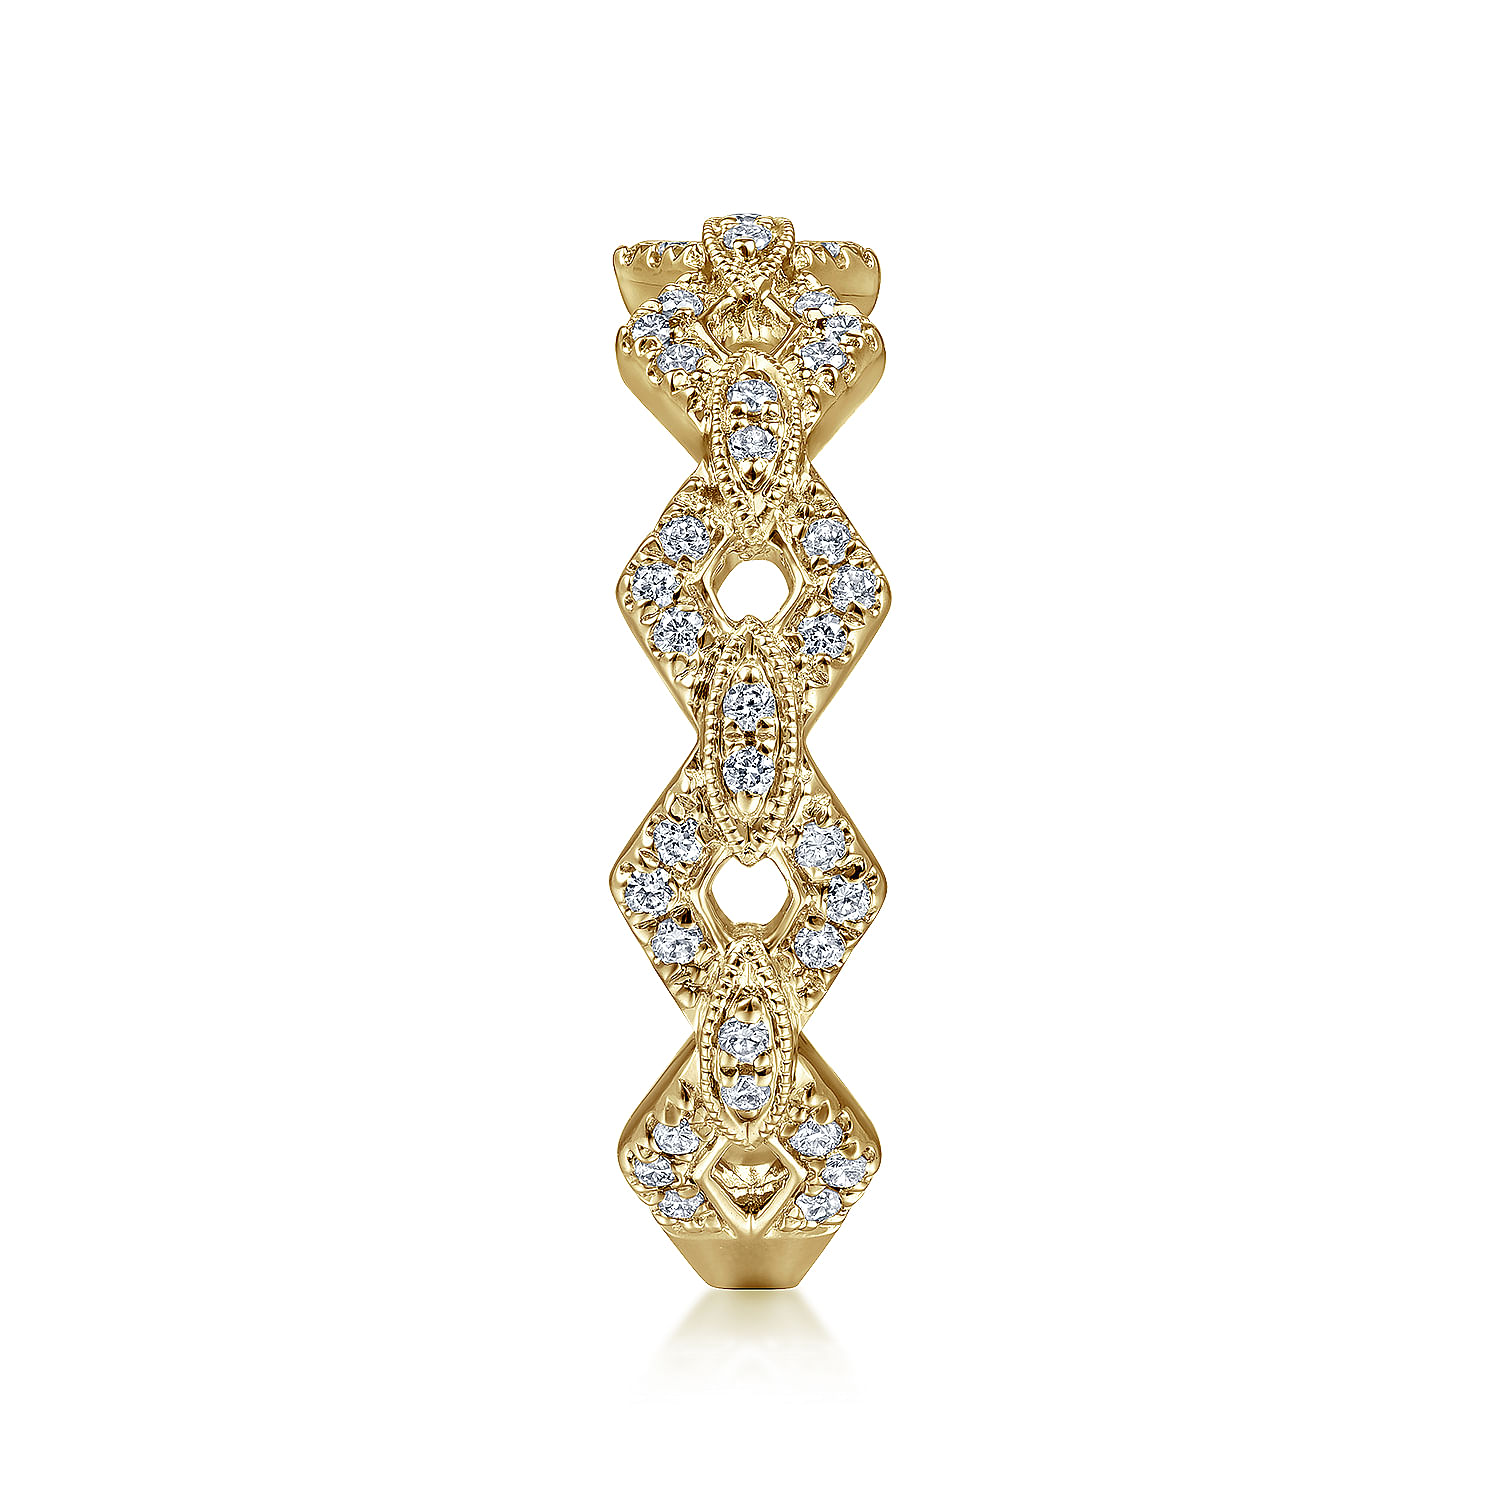 14K Yellow Gold Chain Link Stackable Diamond Ring